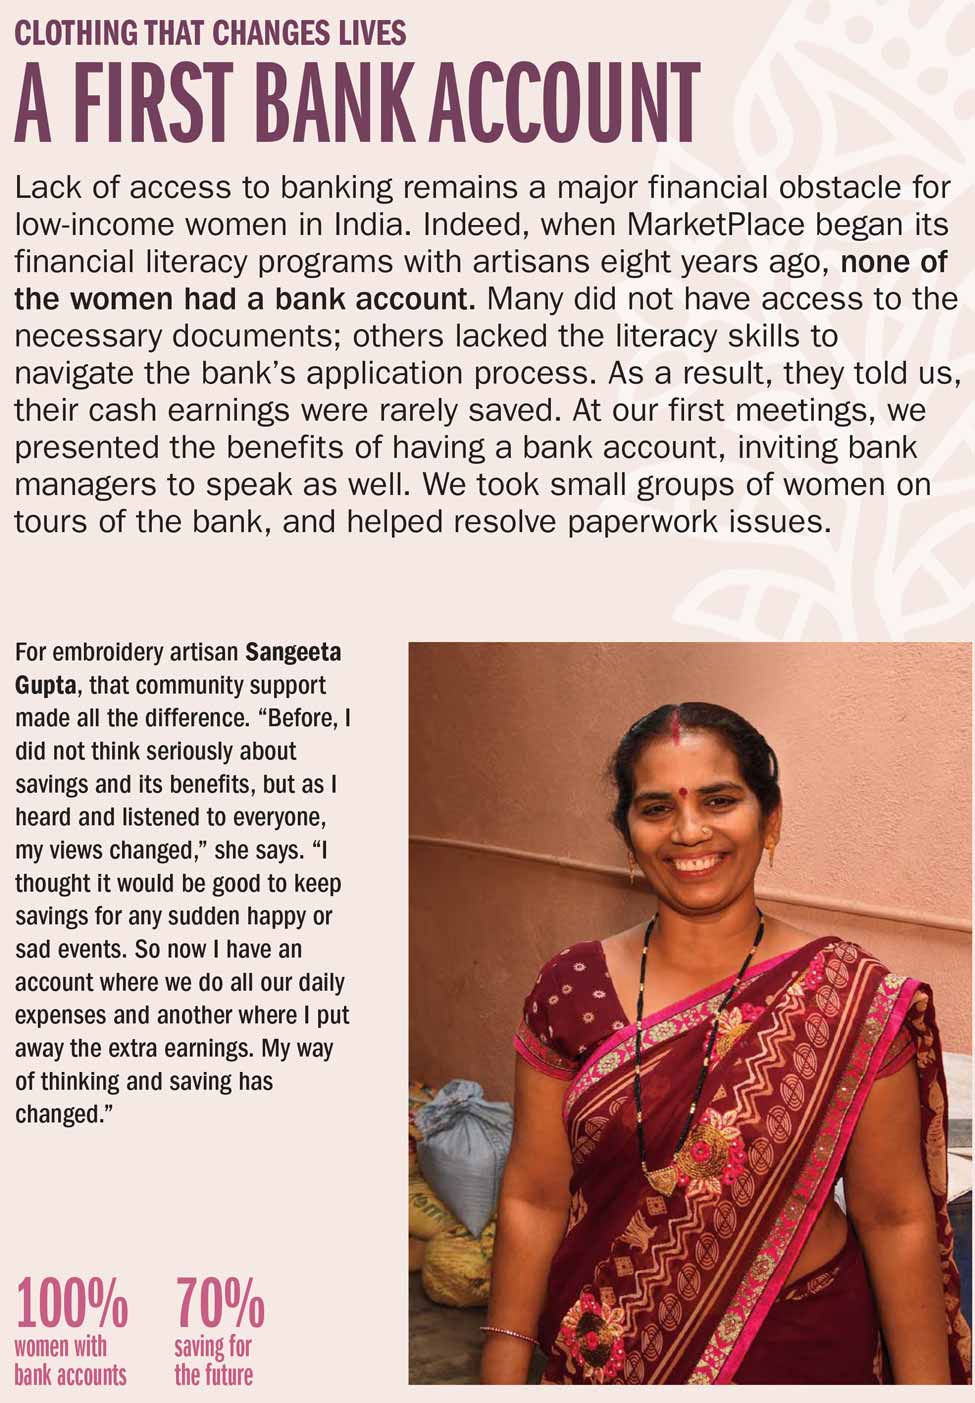 A FIRST BANK ACCOUNT Lack of access to banking remains a major financial obstacle for low-income women in India. Indeed, when MarketPlace began its financial literacy programs with artisans eight years ago, none of the women had a bank account. Many did not have access to the necessary documents; others lacked the literacy skills to navigate the bank's application process. As a result, they told us, their cash earnings were rarely saved. At our first meetings, we presented the benefits of having a bank account, inviting bank managers to speak as well. We took small groups of women on tours of the bank, and helped resolve paperwork issues. For embroidery artisan Sangeeta Gupta, that community support made all the difference. 